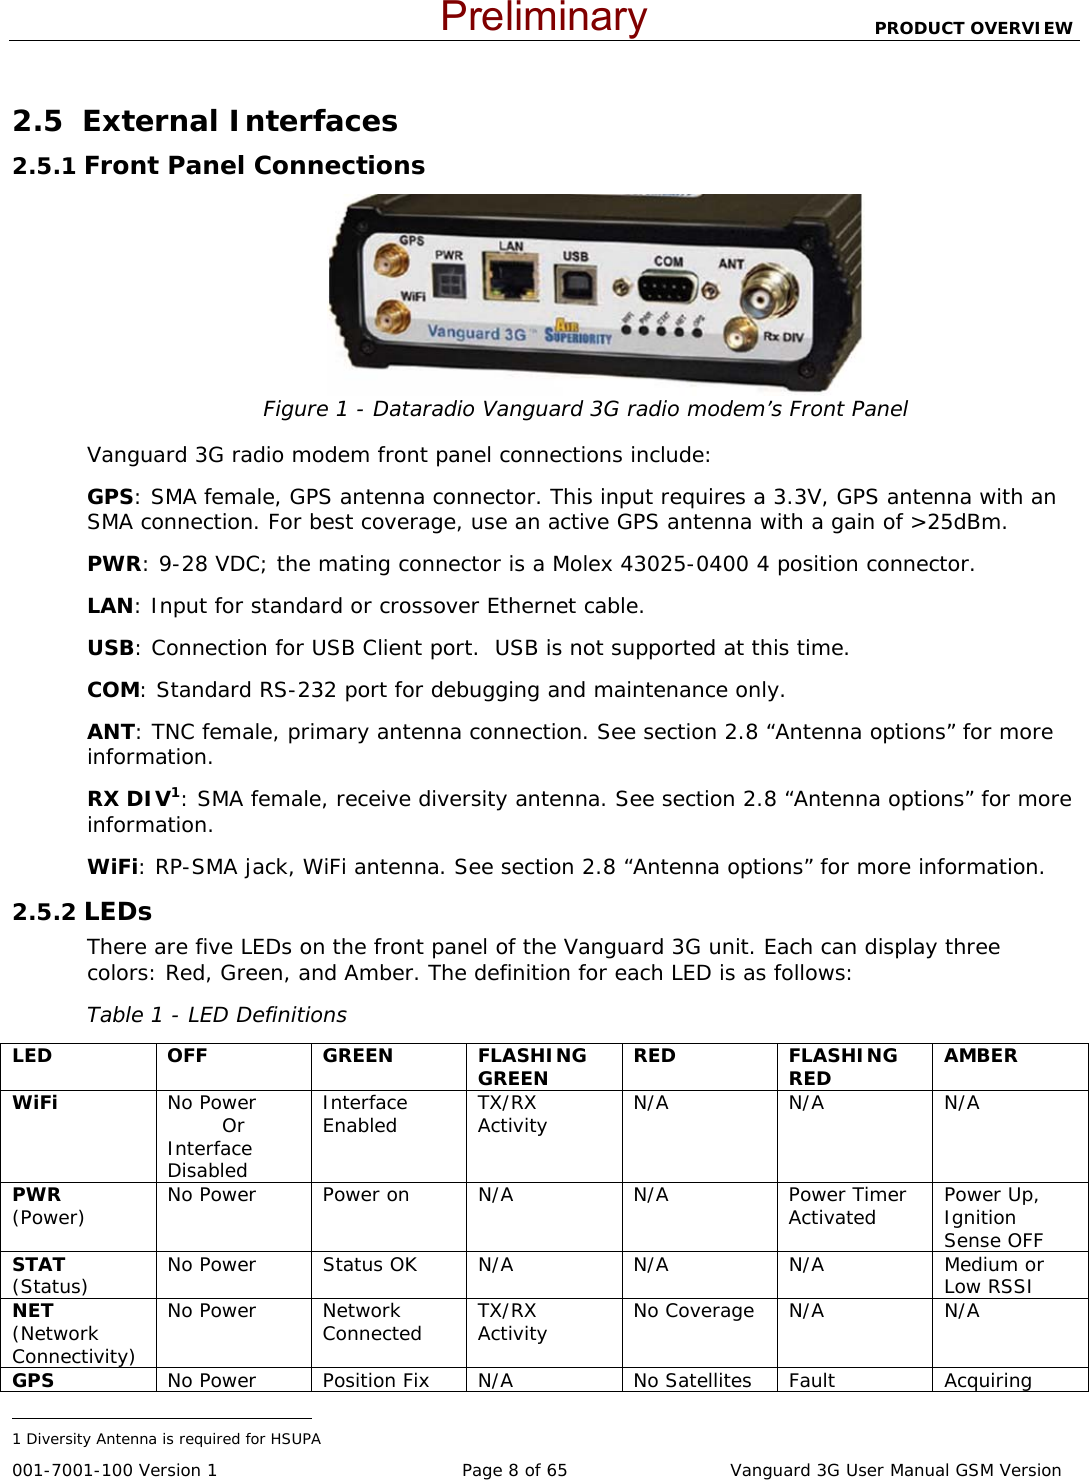                          PRODUCT OVERVIEW  001-7001-100 Version 1       Page 8 of 65       Vanguard 3G User Manual GSM Version  2.5  External Interfaces 2.5.1 Front Panel Connections  Figure 1 - Dataradio Vanguard 3G radio modem’s Front Panel  Vanguard 3G radio modem front panel connections include: GPS: SMA female, GPS antenna connector. This input requires a 3.3V, GPS antenna with an SMA connection. For best coverage, use an active GPS antenna with a gain of &gt;25dBm.   PWR: 9-28 VDC; the mating connector is a Molex 43025-0400 4 position connector. LAN: Input for standard or crossover Ethernet cable. USB: Connection for USB Client port.  USB is not supported at this time. COM: Standard RS-232 port for debugging and maintenance only.  ANT: TNC female, primary antenna connection. See section 2.8 “Antenna options” for more information.   RX DIV1: SMA female, receive diversity antenna. See section 2.8 “Antenna options” for more information. WiFi: RP-SMA jack, WiFi antenna. See section 2.8 “Antenna options” for more information. 2.5.2 LEDs There are five LEDs on the front panel of the Vanguard 3G unit. Each can display three colors: Red, Green, and Amber. The definition for each LED is as follows: Table 1 - LED Definitions LED OFF GREEN FLASHING GREEN  RED FLASHING RED  AMBER WiFi  No Power  Or Interface Disabled Interface Enabled  TX/RX Activity  N/A N/A N/A PWR (Power) No Power   Power on  N/A  N/A  Power Timer Activated  Power Up, Ignition Sense OFF STAT (Status) No Power  Status OK  N/A  N/A  N/A  Medium or Low RSSI NET (Network Connectivity) No Power  Network Connected  TX/RX Activity  No Coverage  N/A  N/A GPS  No Power  Position Fix  N/A  No Satellites  Fault  Acquiring                                                  1 Diversity Antenna is required for HSUPA Preliminary